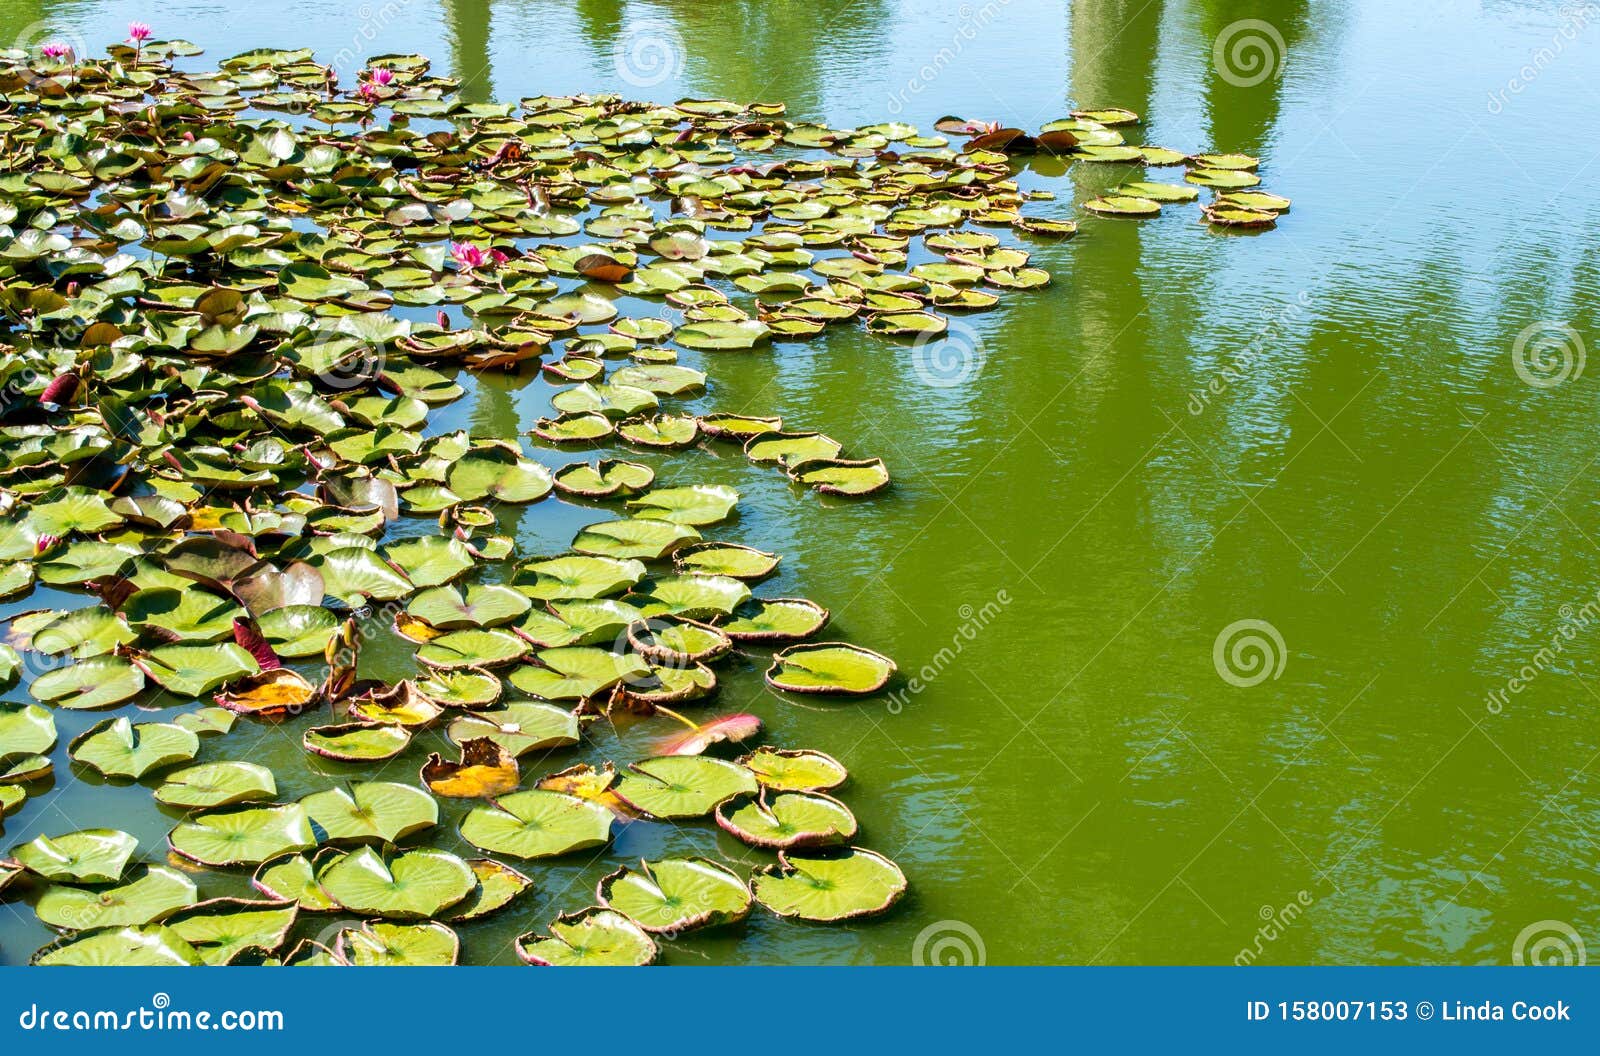 pink water lilies with green lily pads in a murky pond